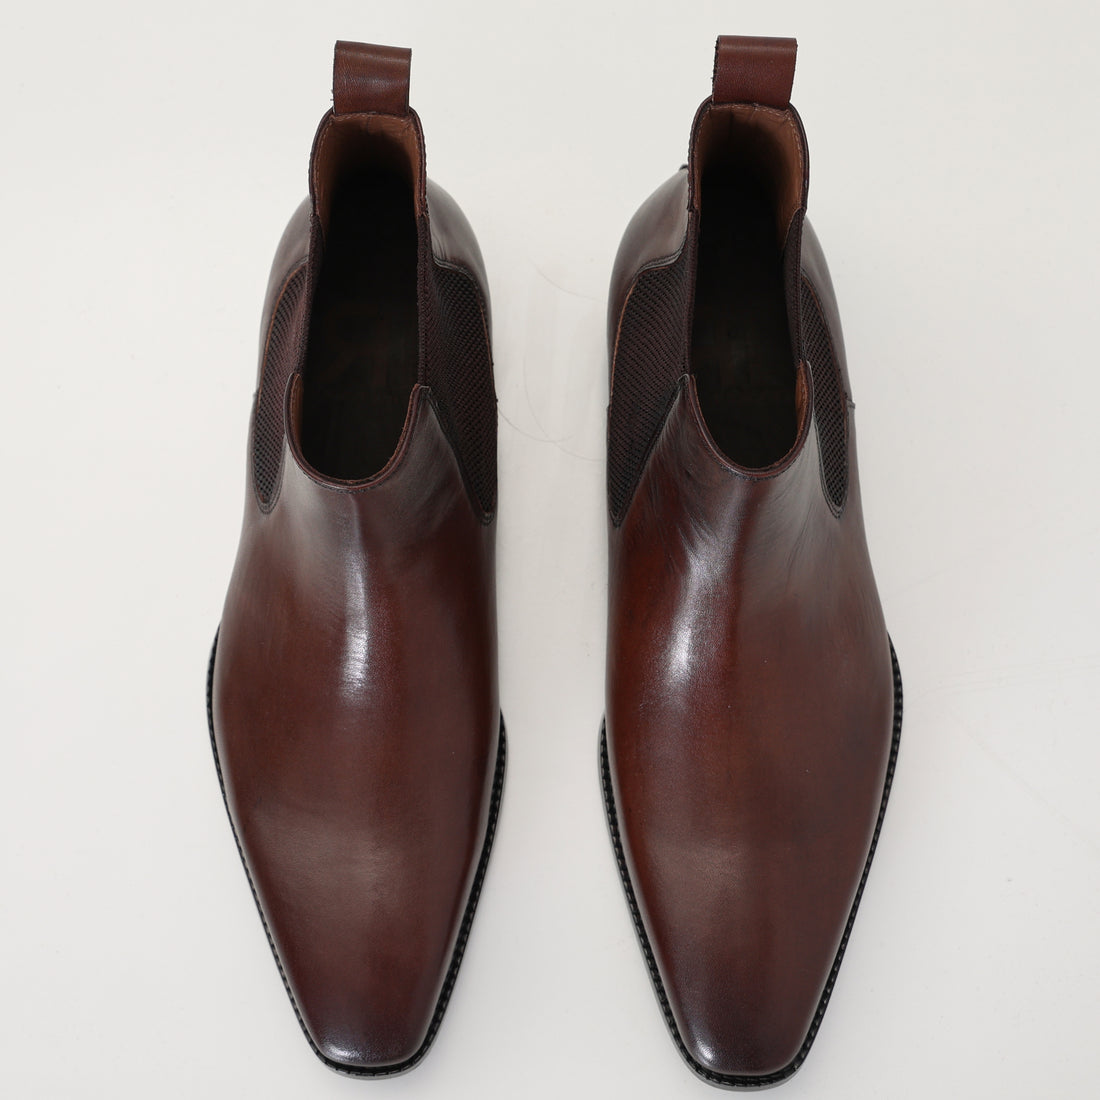 HANDMADE LEATHER CHELSEA BOOT - BROWN